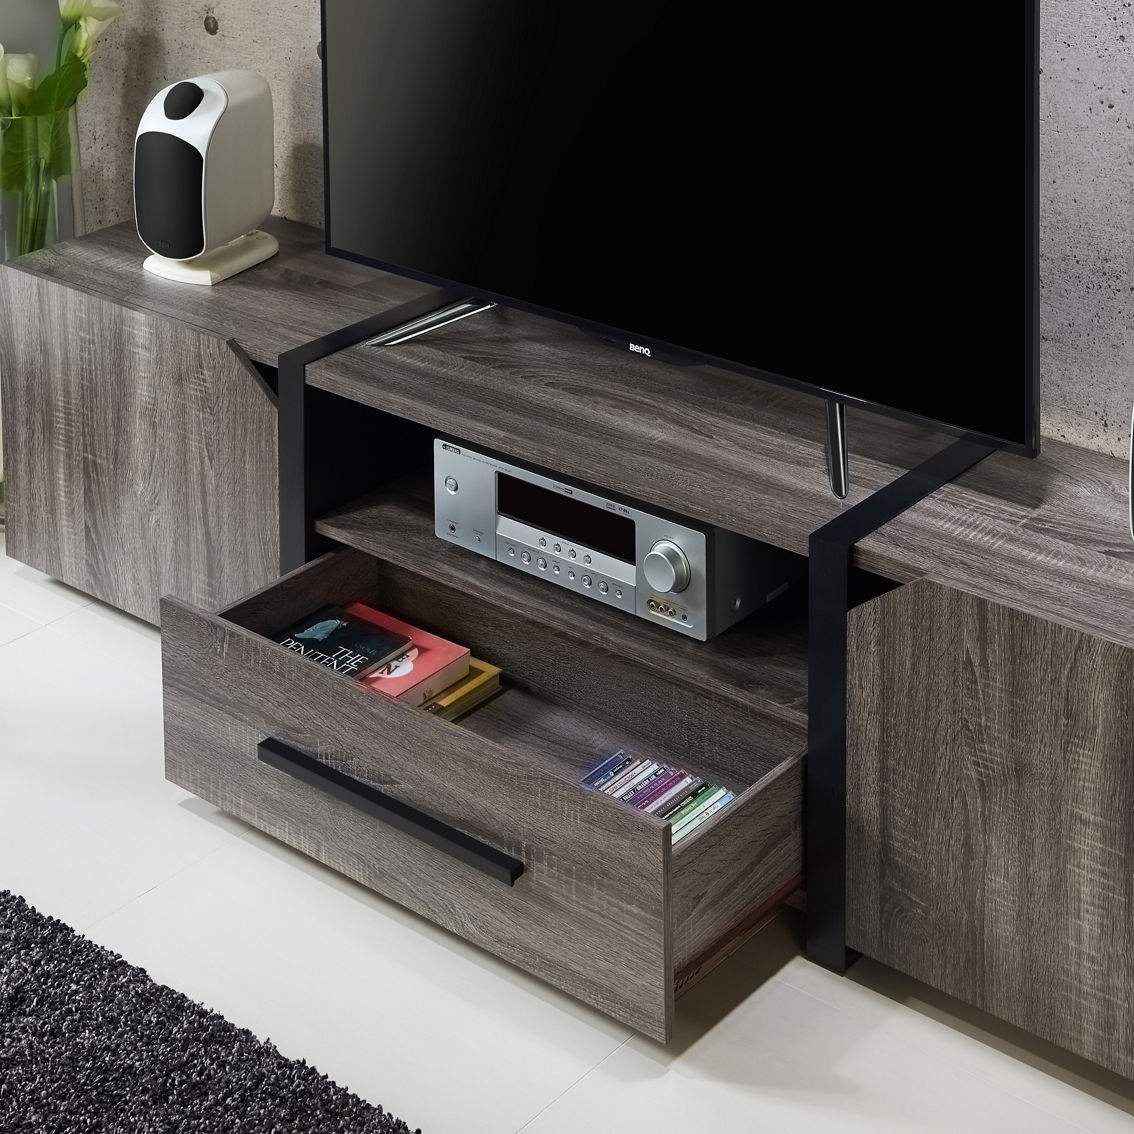 Furniture of America Diego Rustic Wood 81.5 in. TV Stand - Image 2 of 3